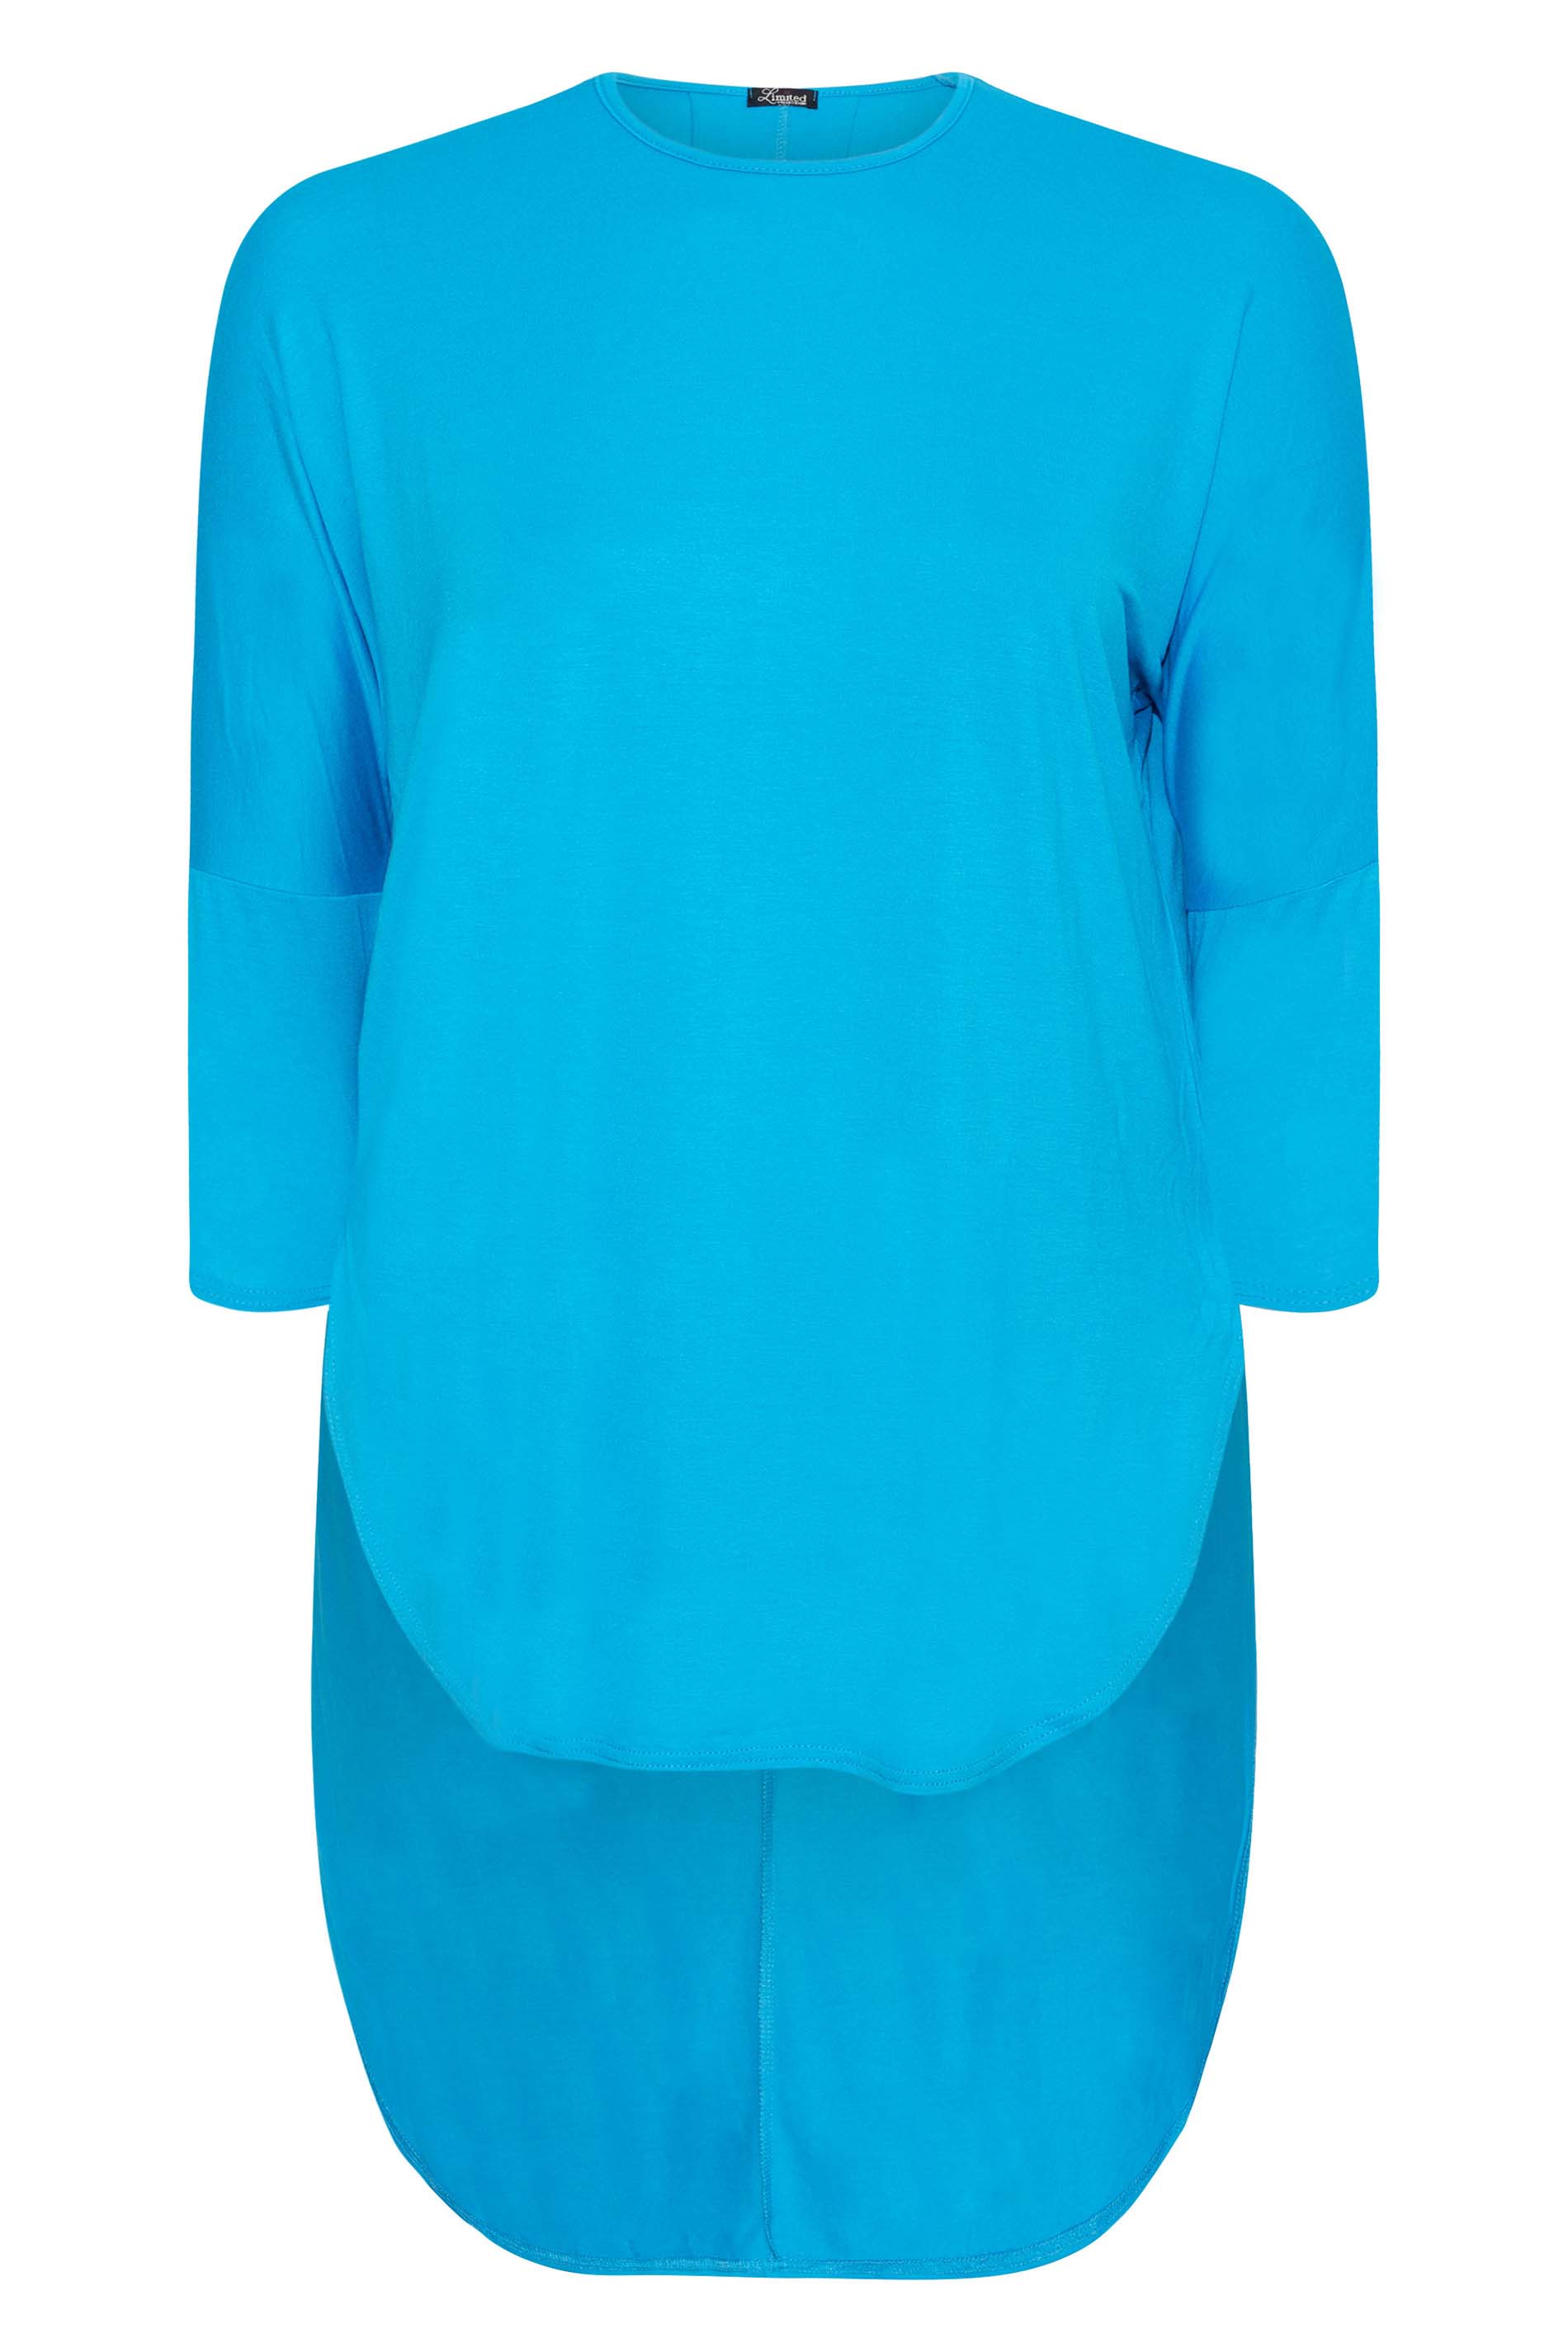 Grande taille  Tops Grande taille  Tops Ourlet Plongeant | LIMITED COLLECTION - T-Shirt Bleu Turquoise Manches Longues Ourlet Plongeant - DP02043